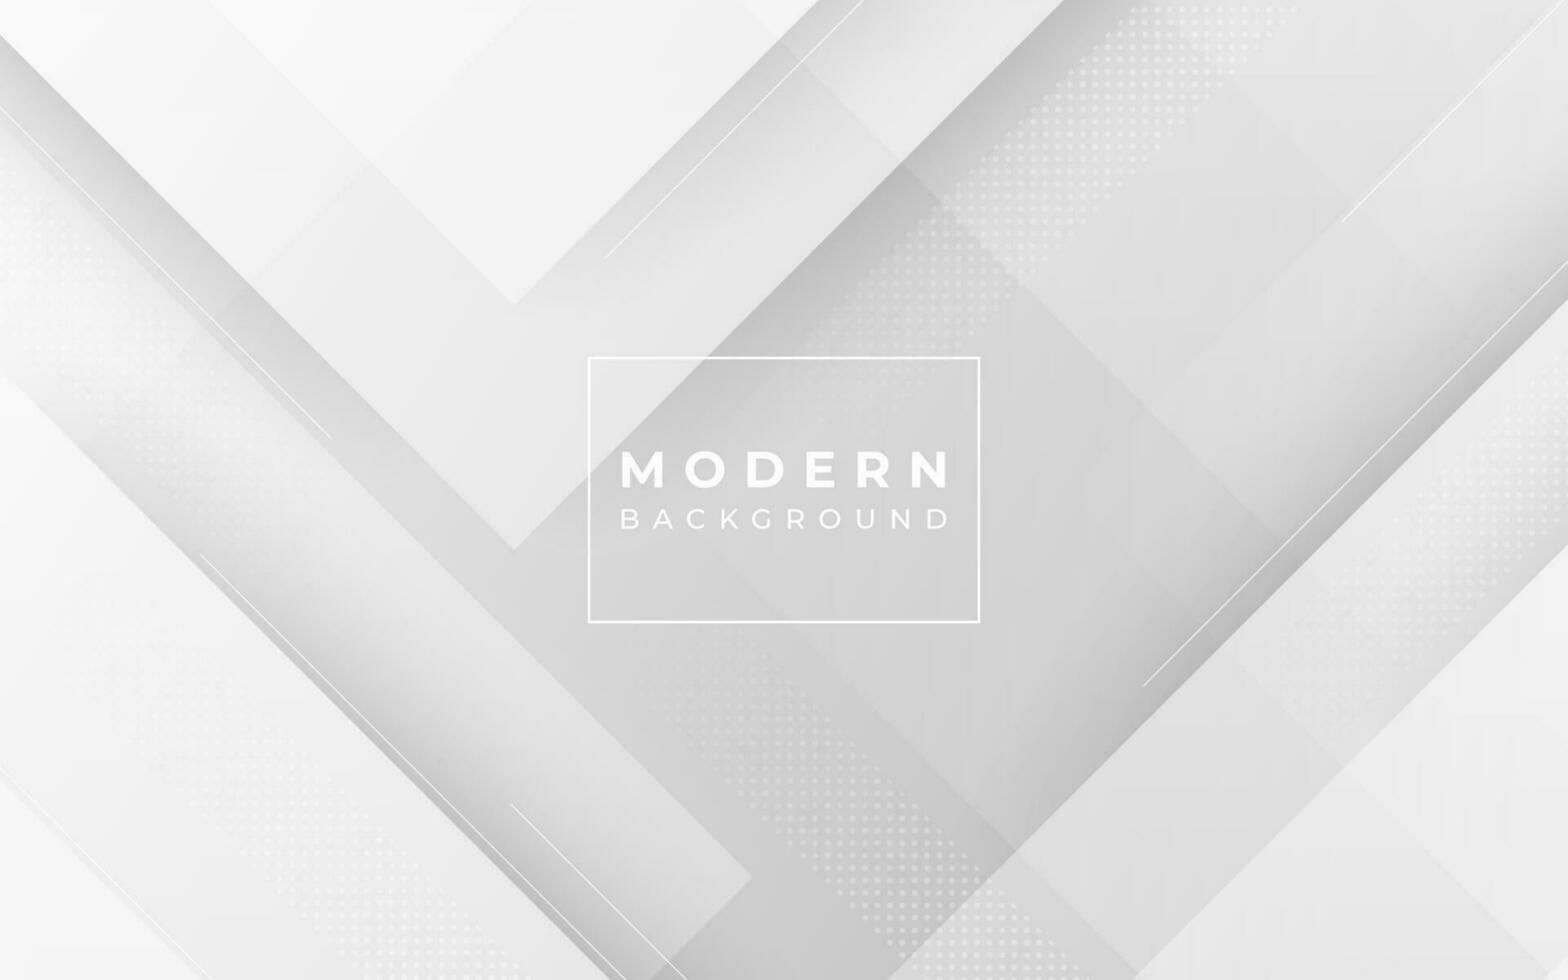 Modern background, geometric style, white and gray color gradation, layered, abstract elegant vector